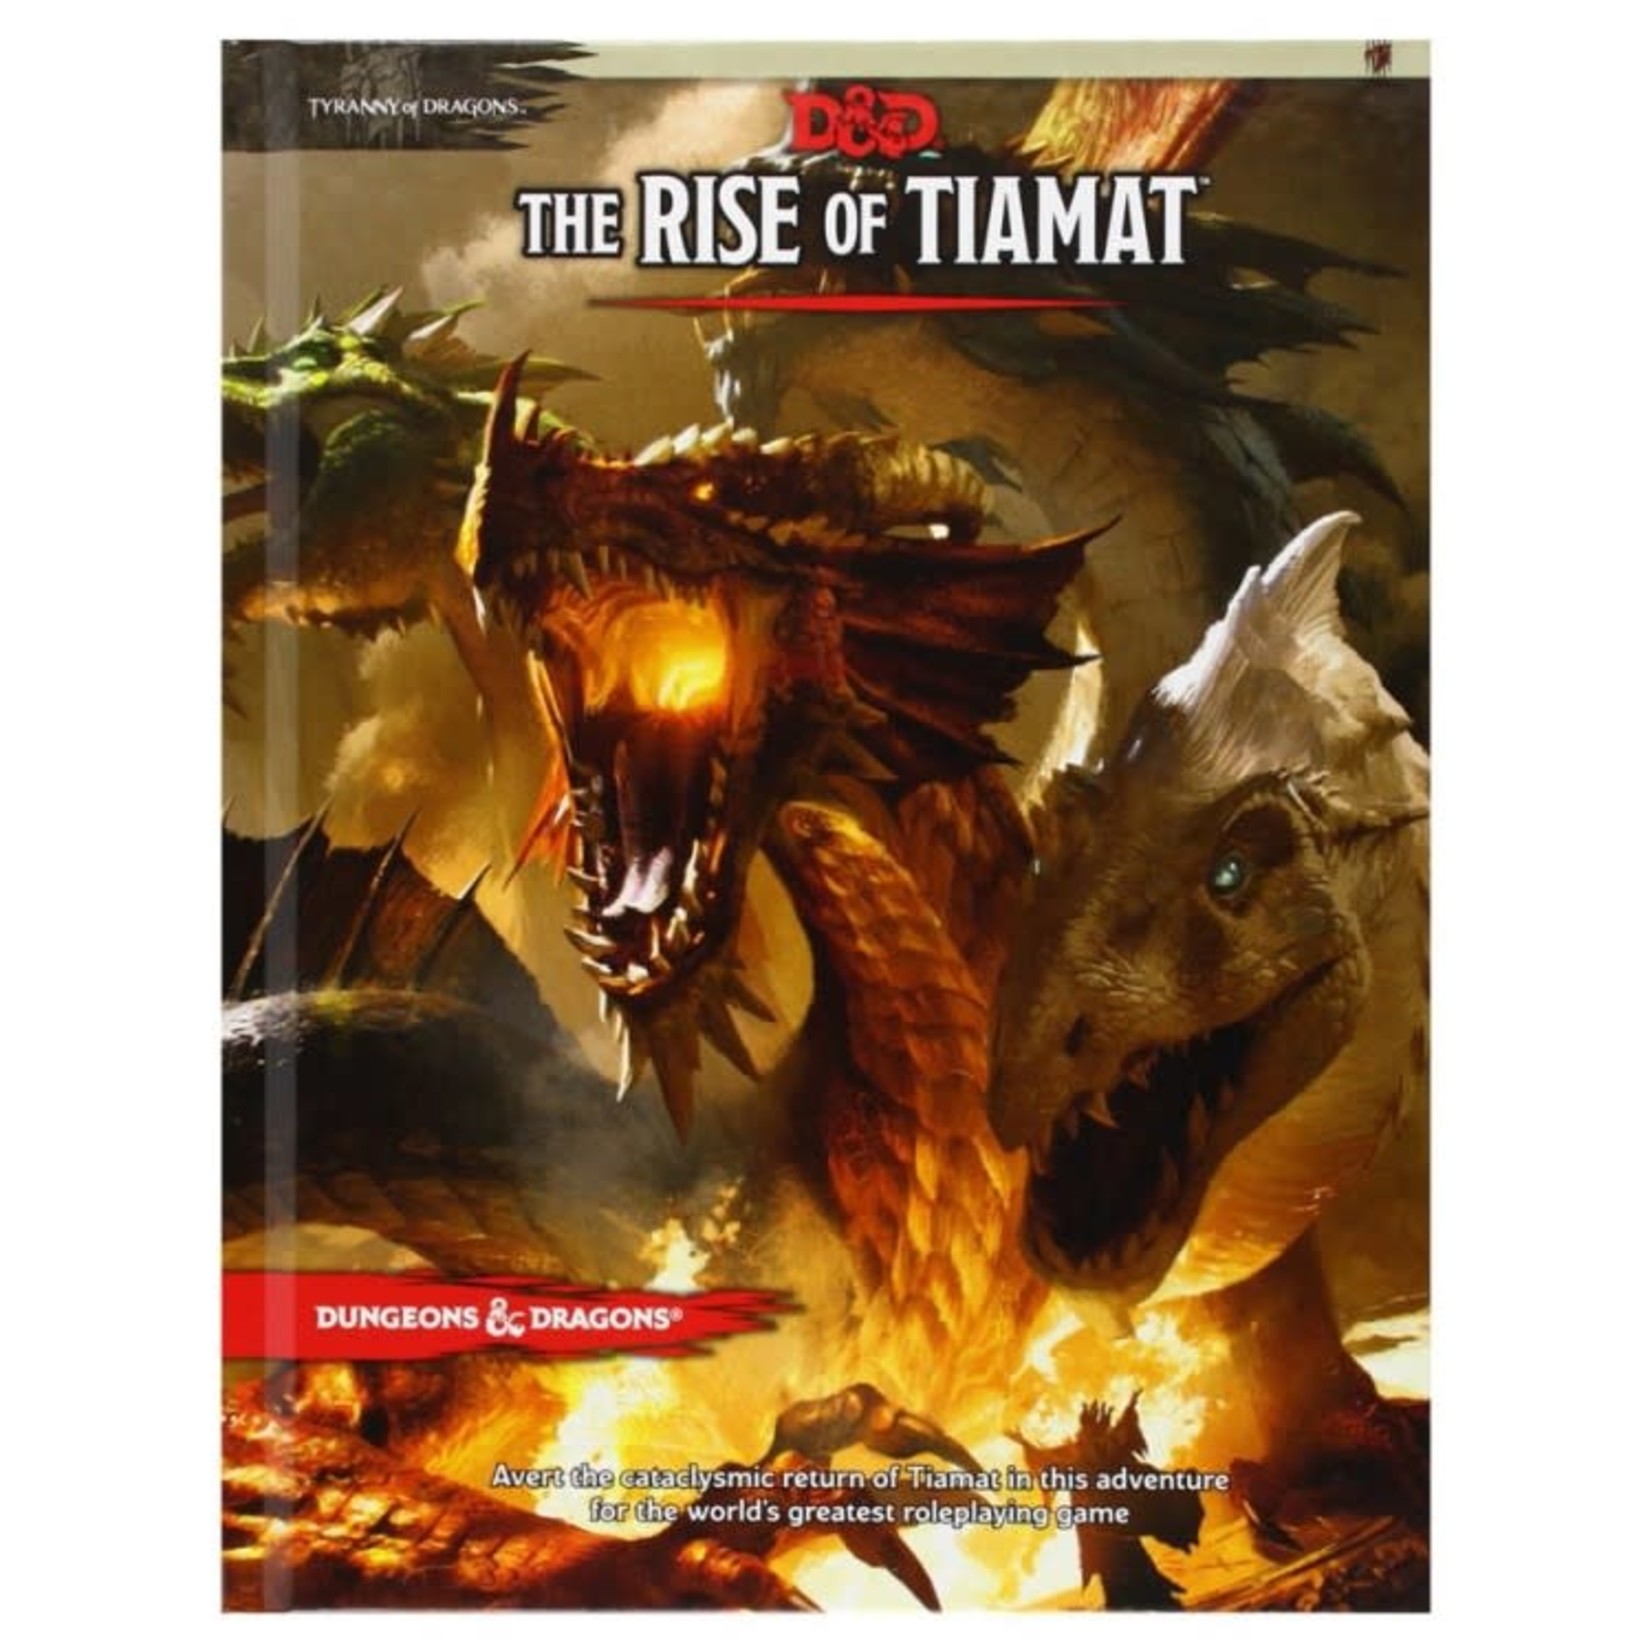 Dungeons & Dragons Dungeons & Dragons 5th Edition: The Rise of Tiamat